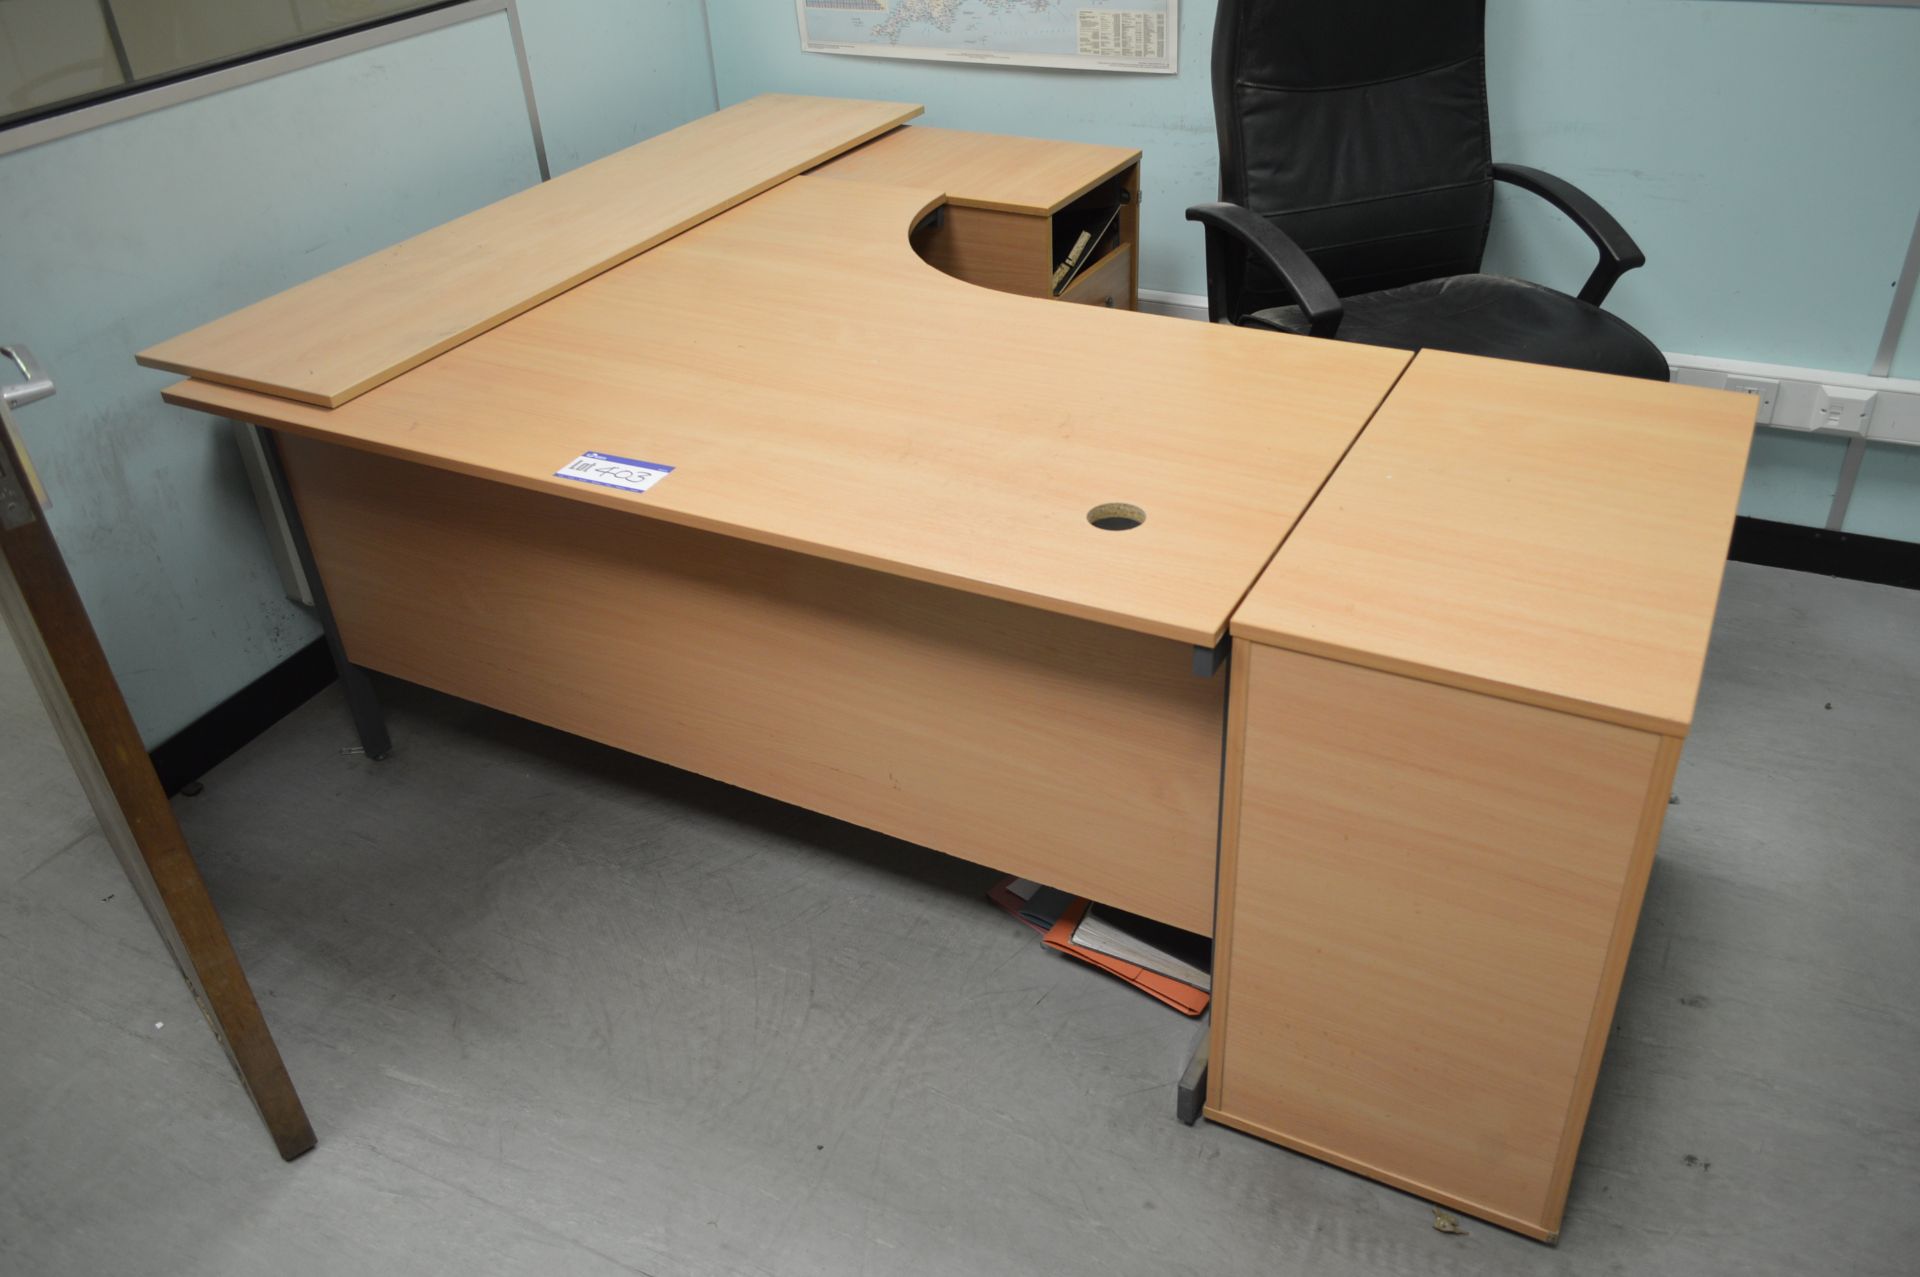 Remaining Loose Office Furniture Contents of Room, - Image 2 of 4